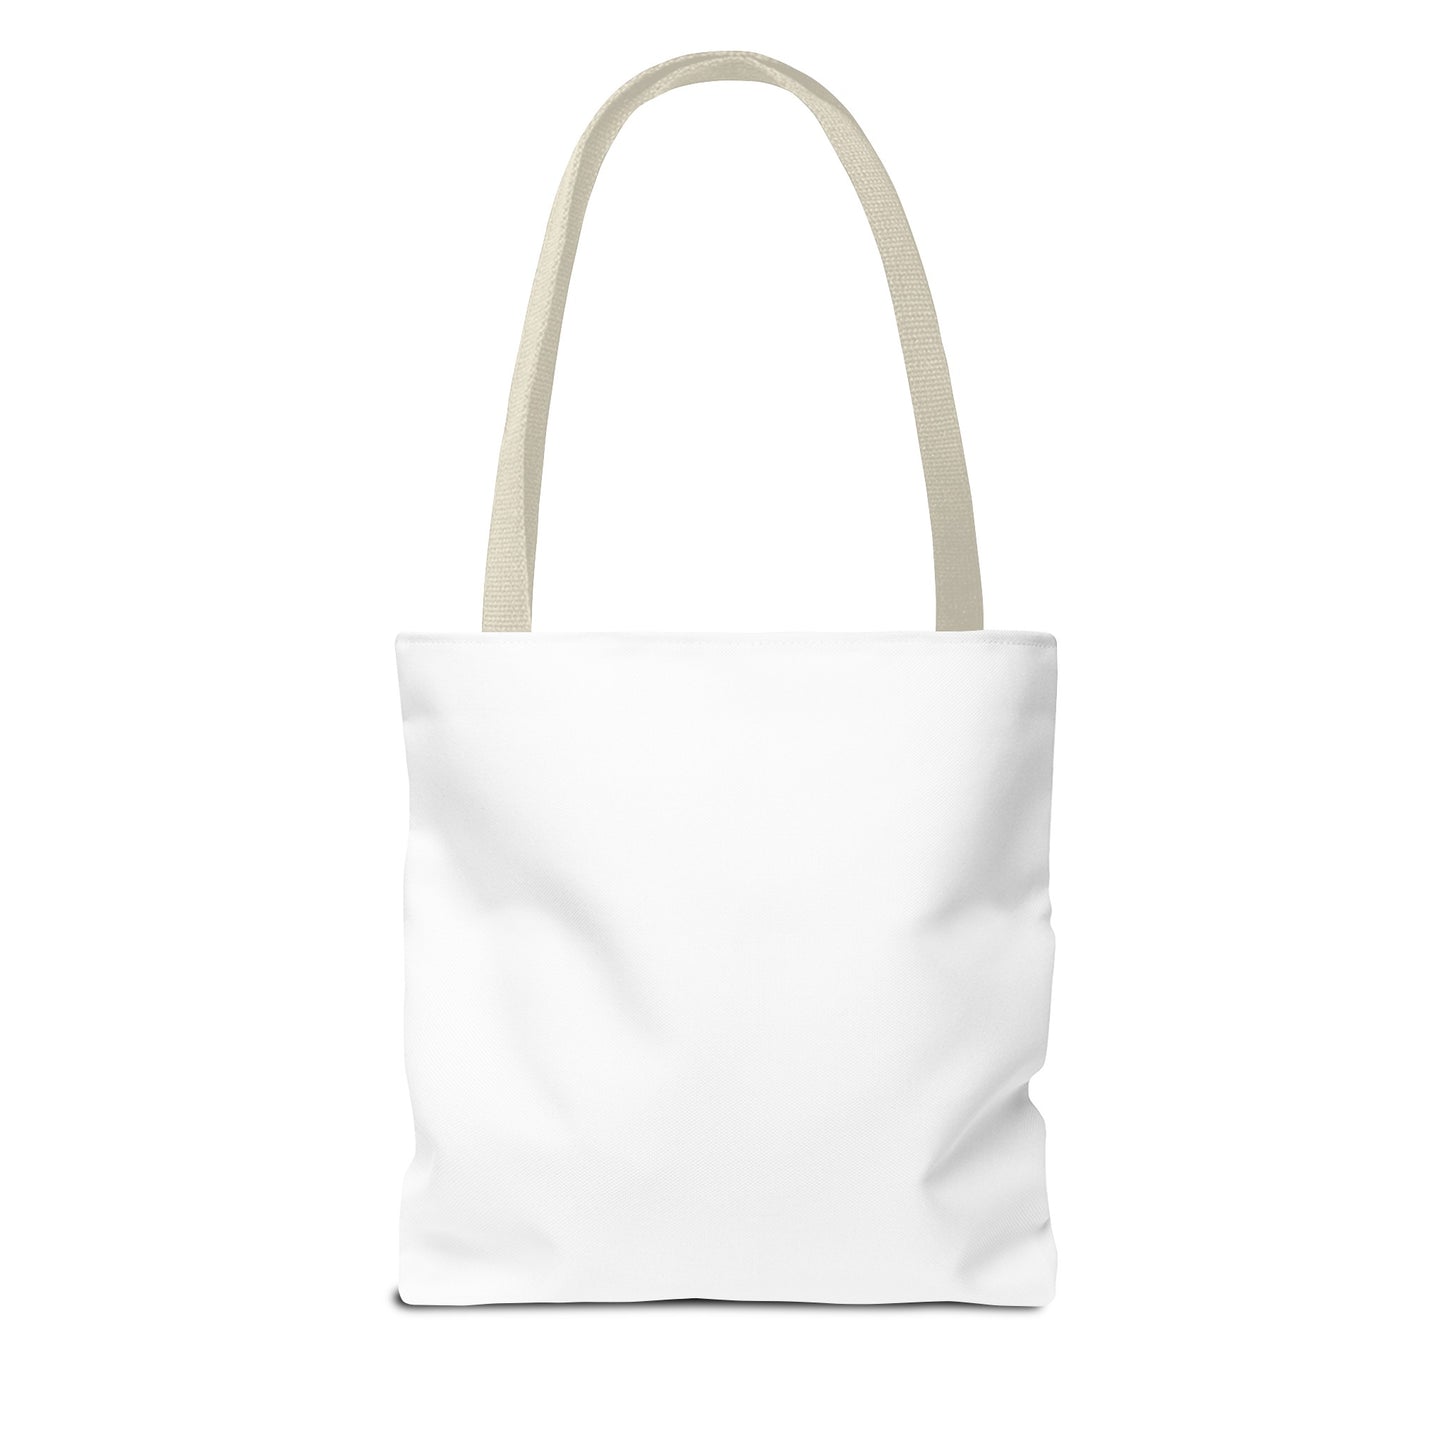 MANICEPTION Tote Bag